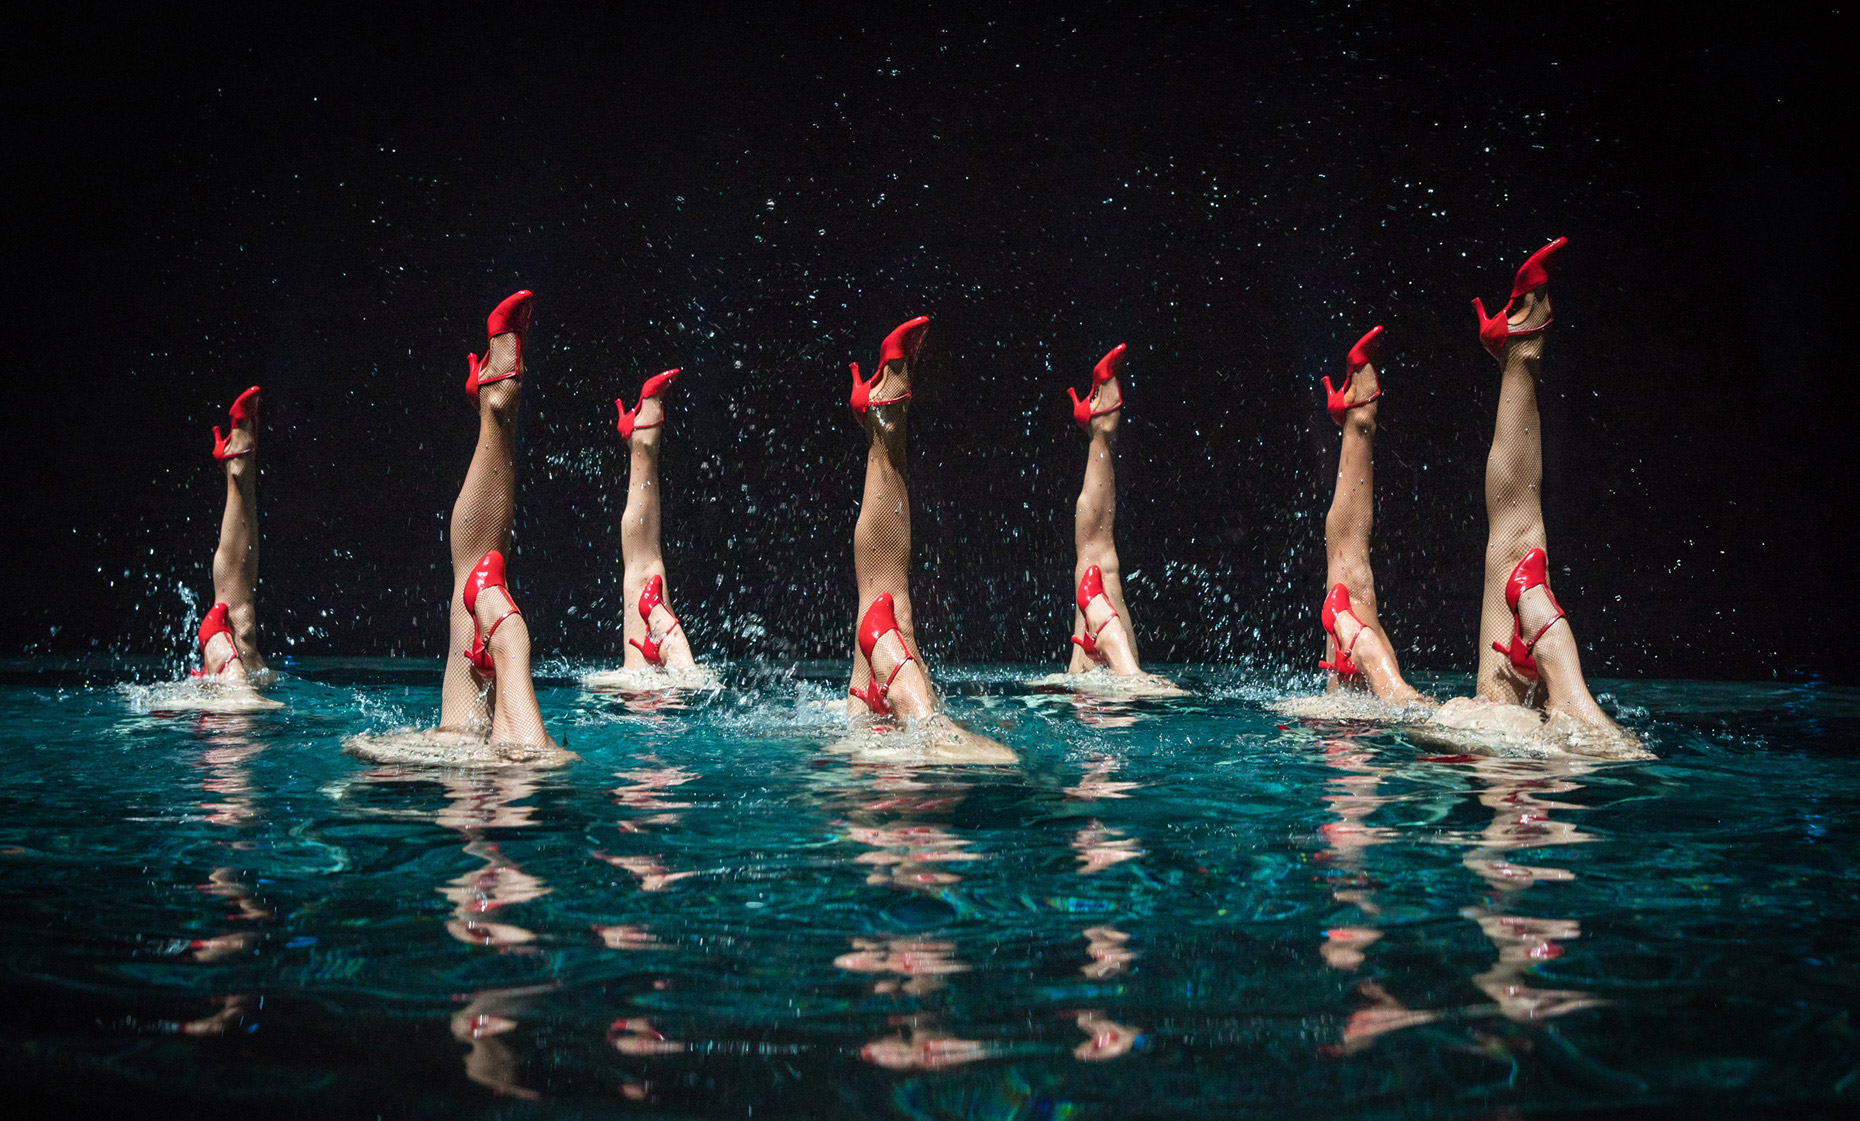 synchronized swimmers legs with red shoes coming out of the water with drops of water surrounding them. Advertising photo for the aquatic show Le Rêve at Wynn Las Vegas. Show . Cirque du Soleil.